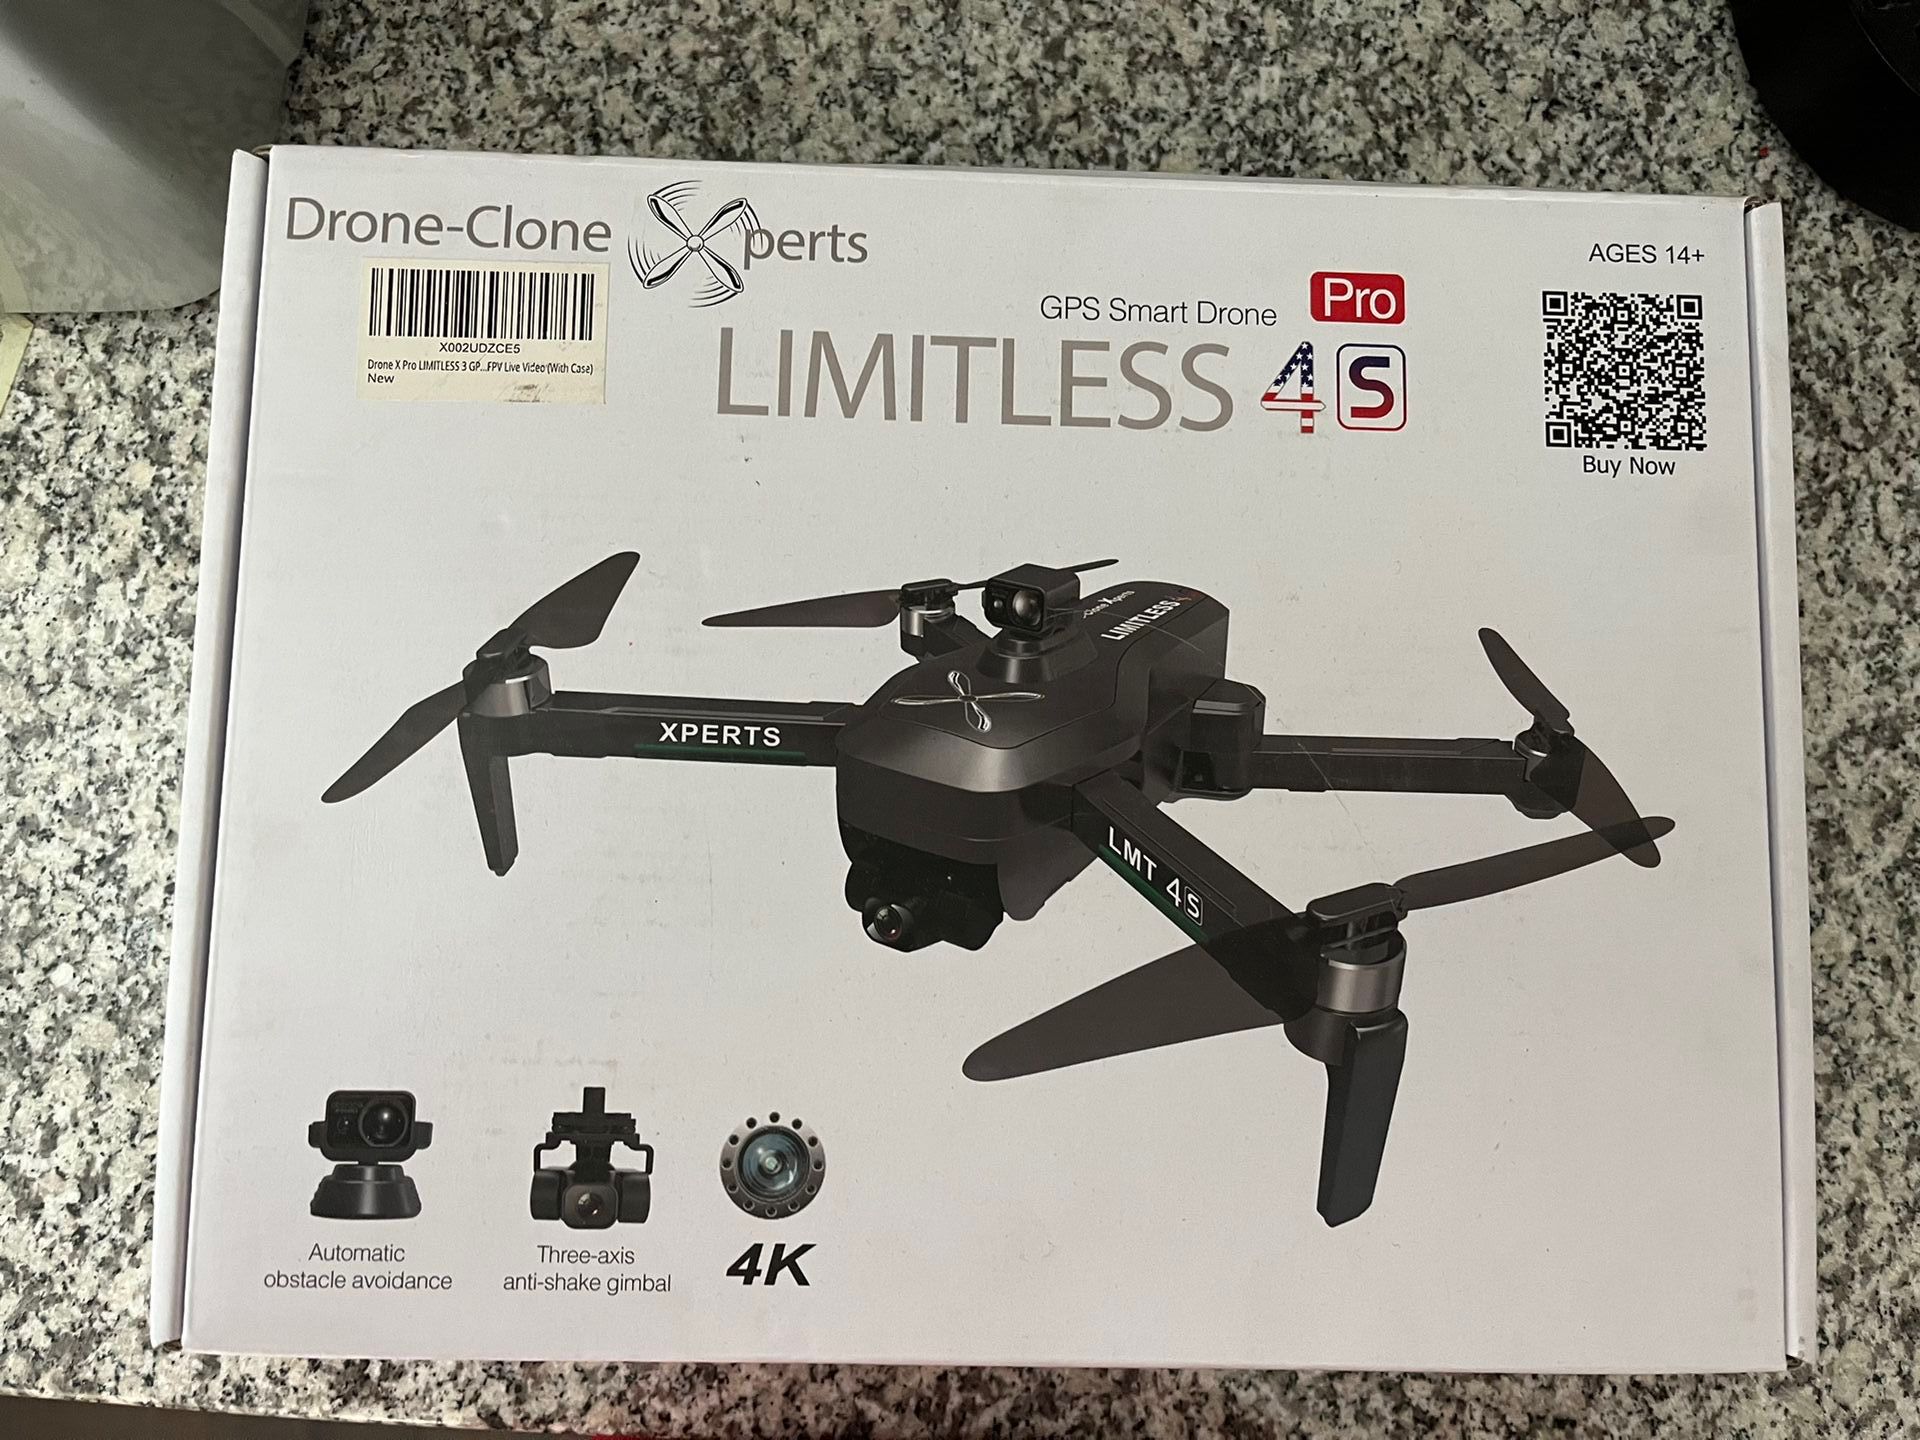 Drone X Pro LIMITLESS 4 GPS 4K UHD Camera Drone for Adults with EVO Obstacle Avoidance, 3-Axis Gimbal, Auto Return Home, Follow Me, Long Flight Time, 